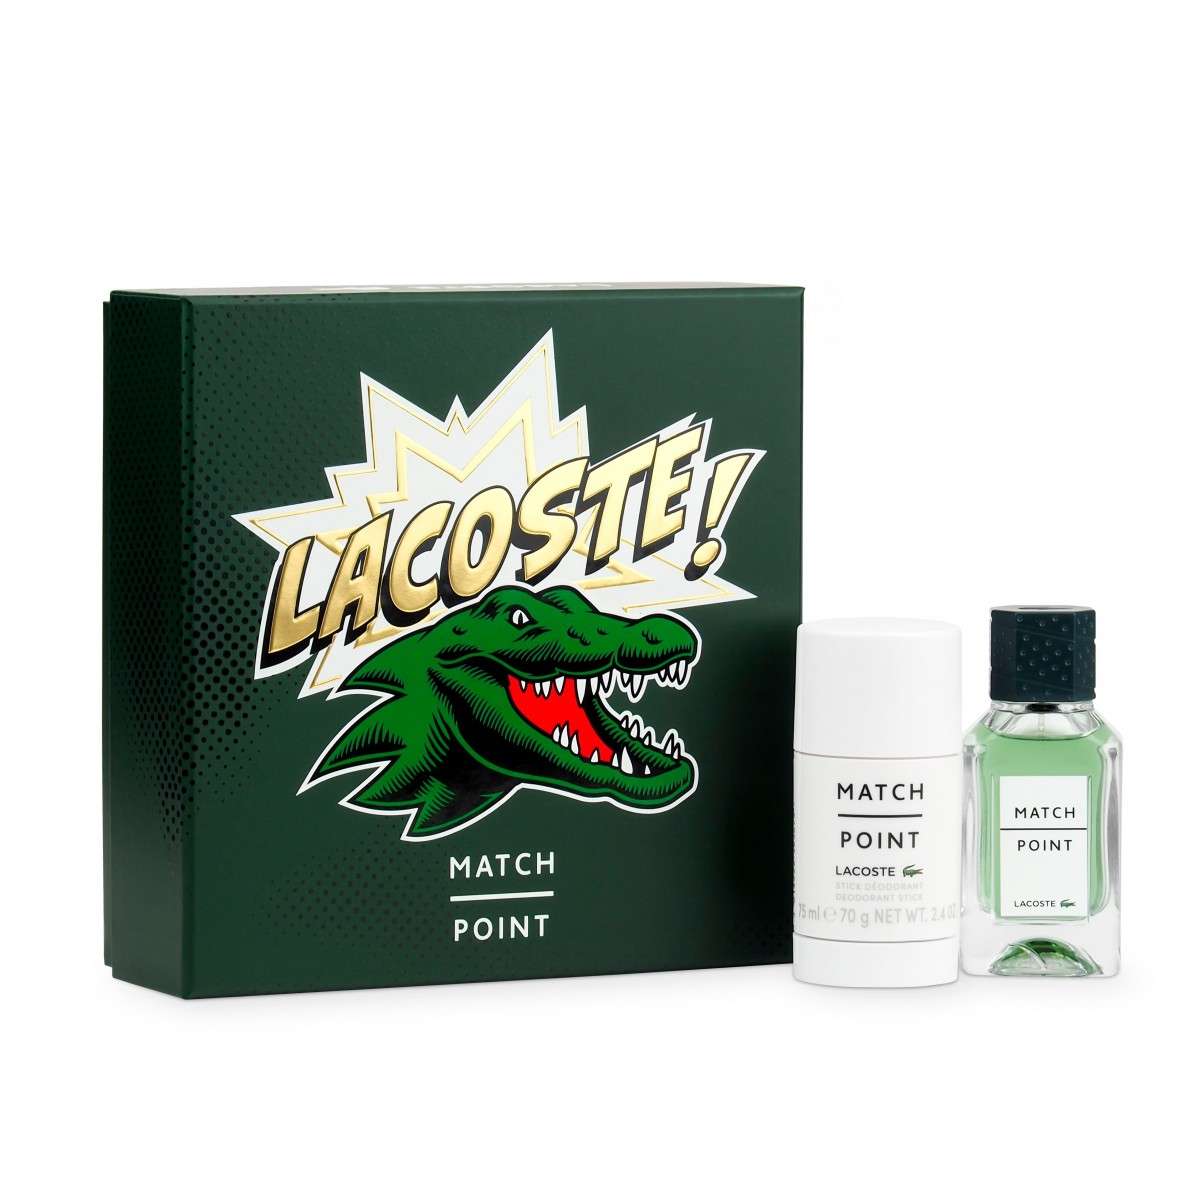 Lacoste - Match Giftset: Fragrance & Deo Combo